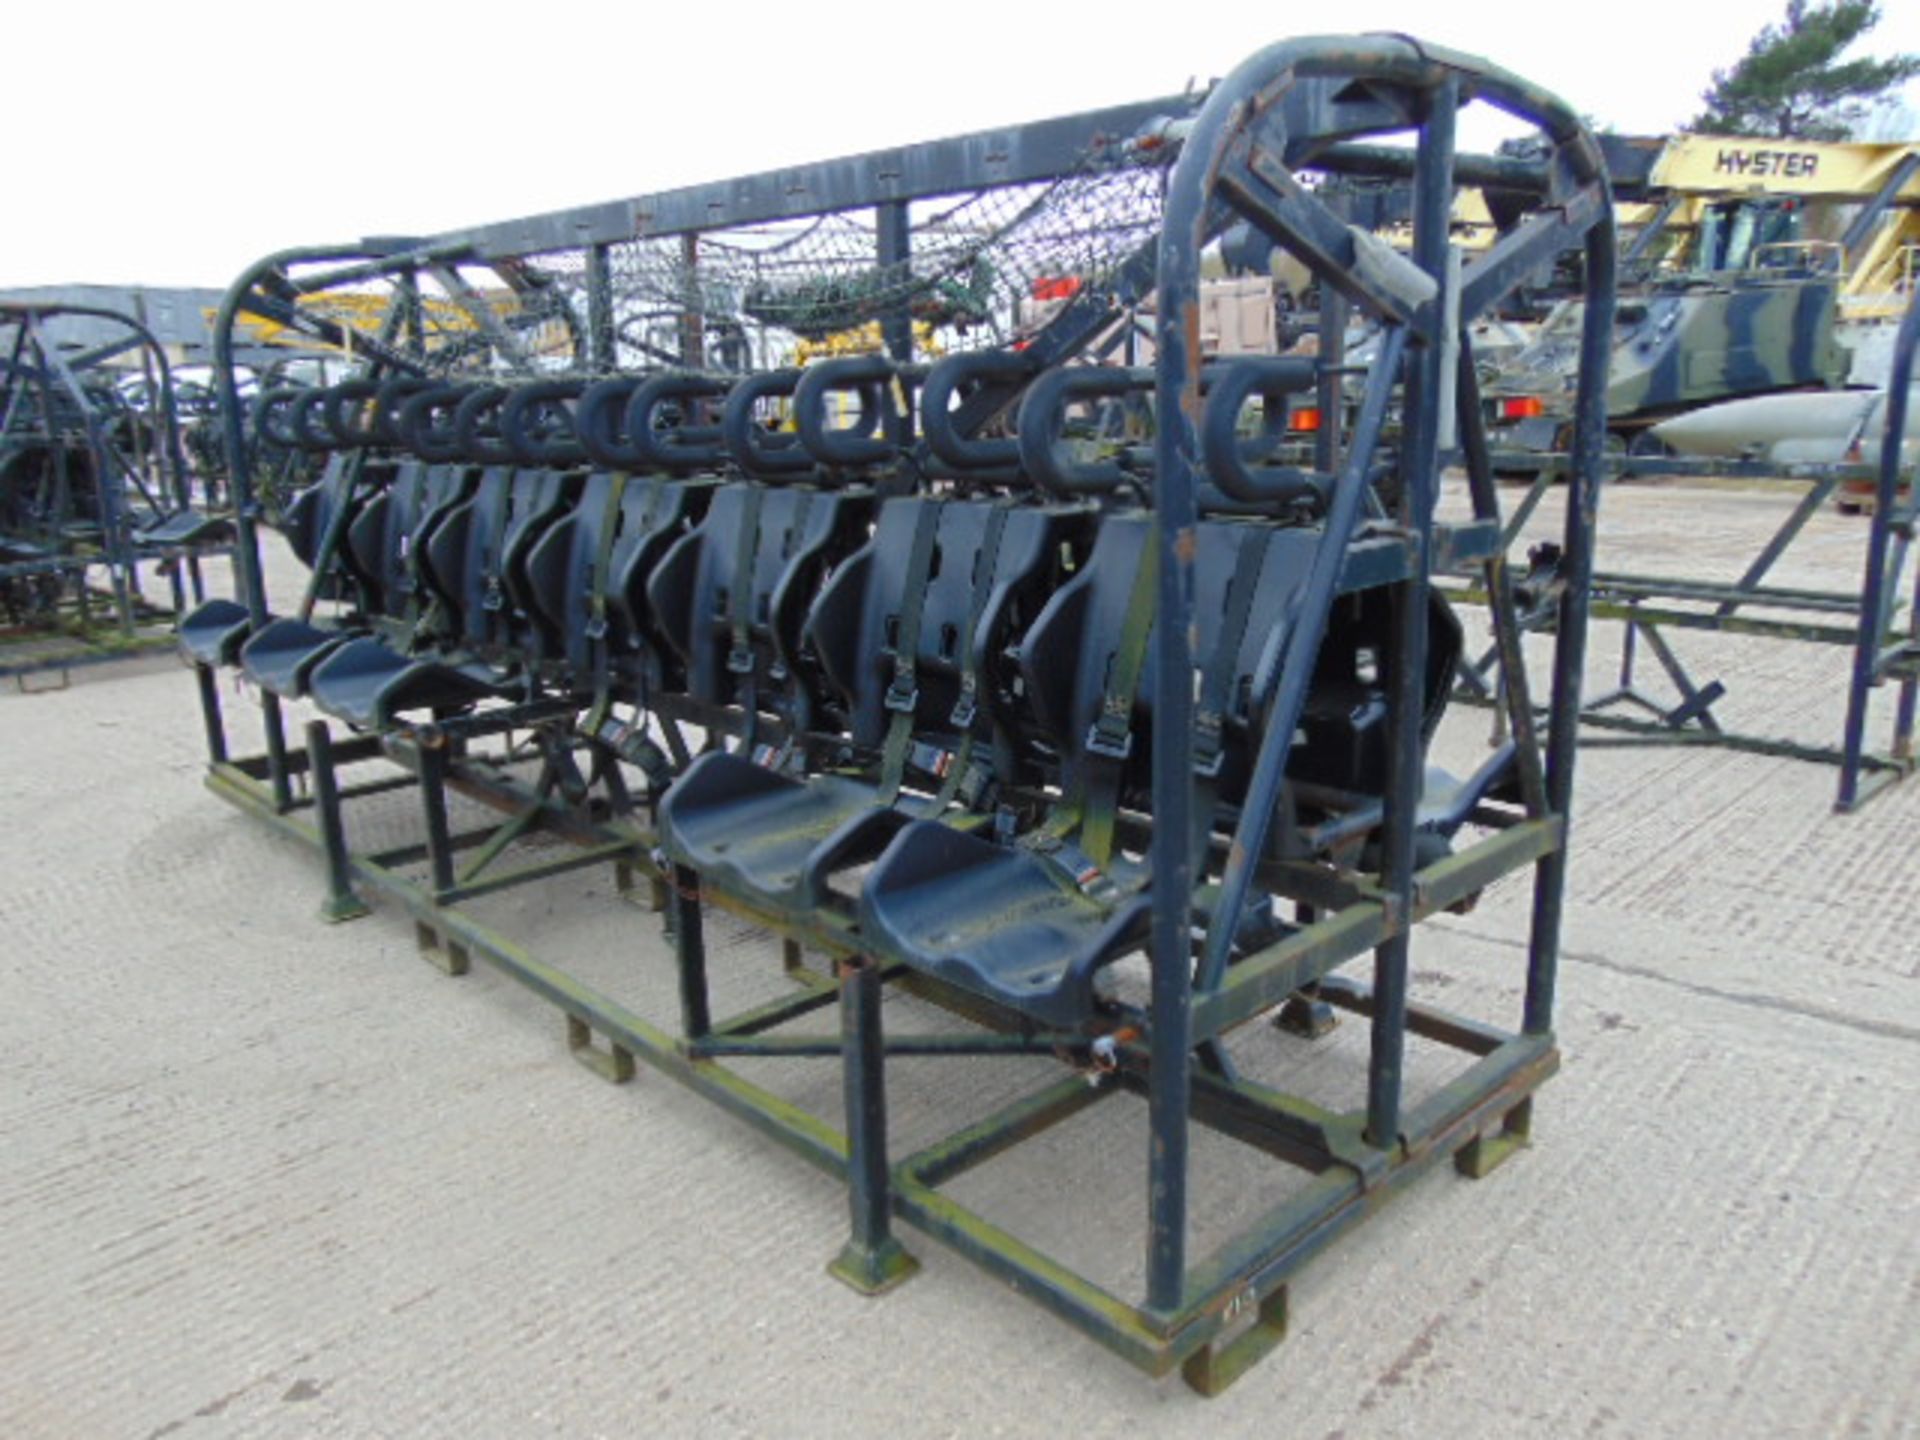 14 Man ROPS Security Seat suitable for Leyland Dafs, Bedfords etc - Image 2 of 6